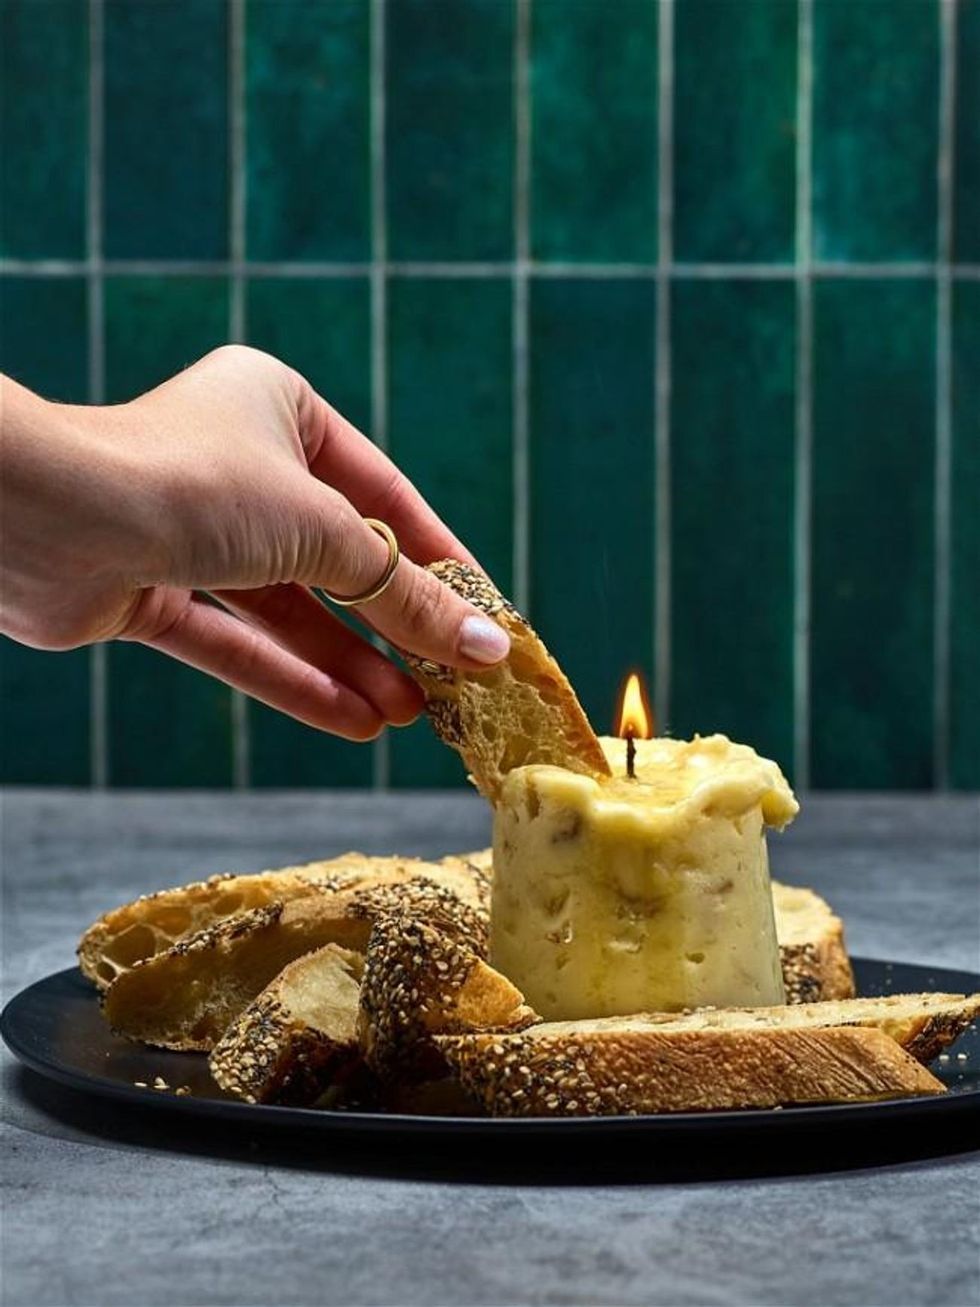 Butter Candles make for great Christmas appetizers